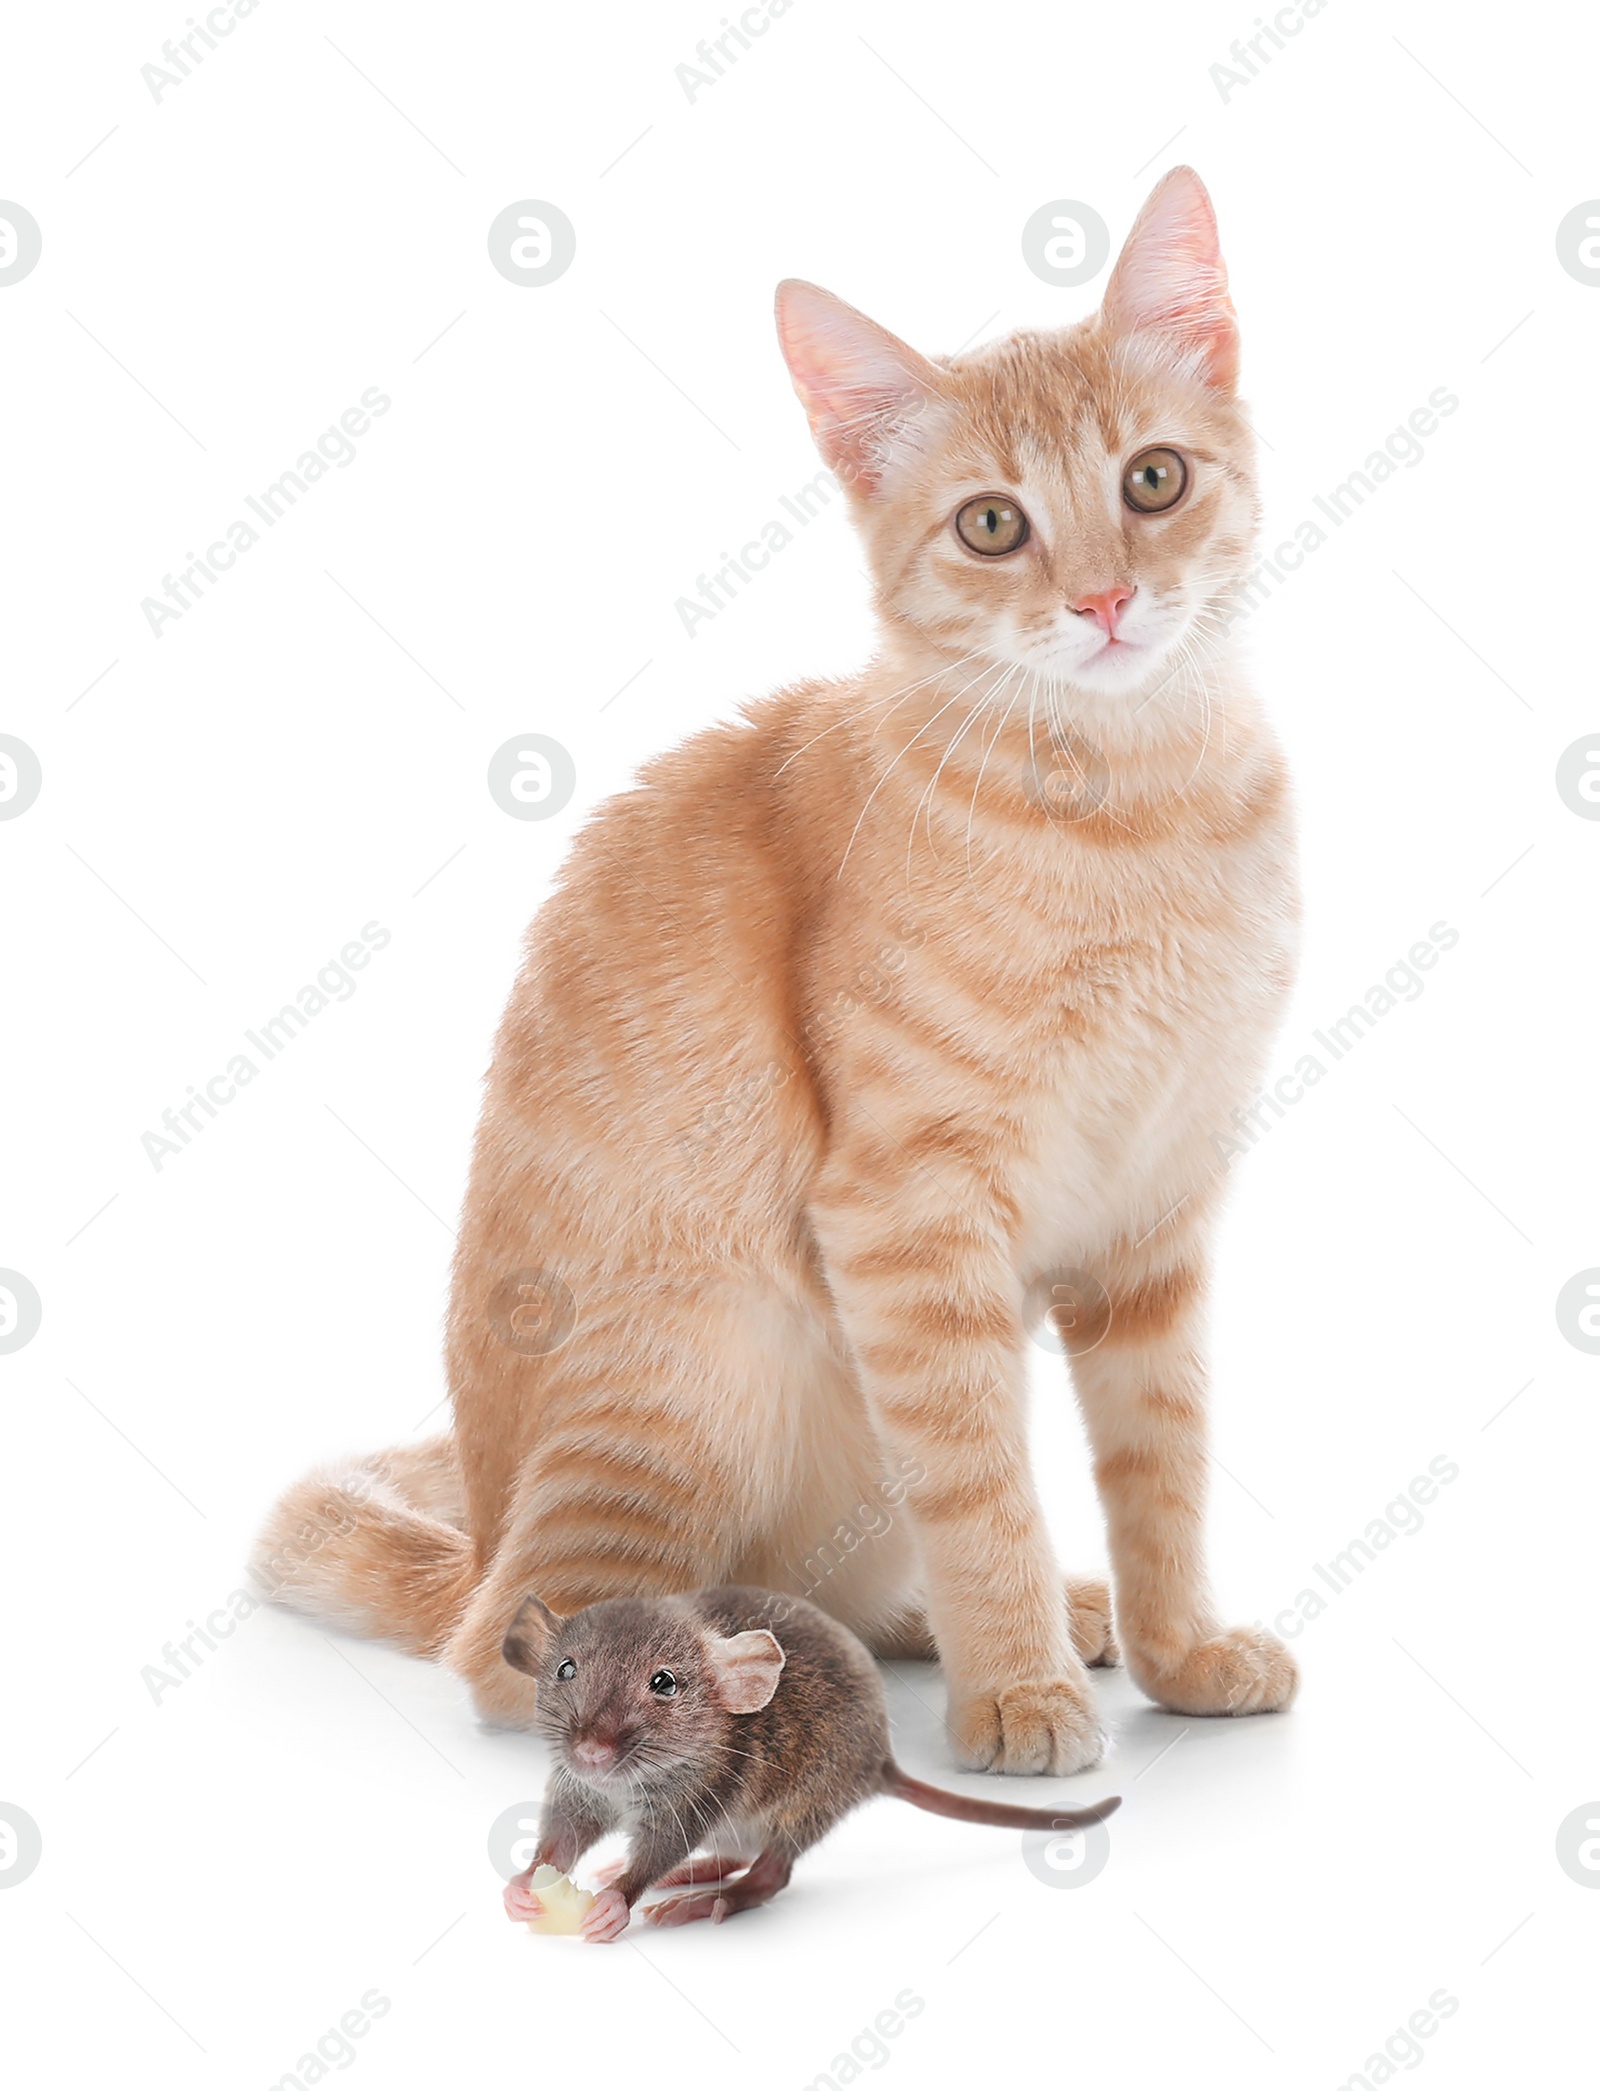 Image of Cute yellow tabby cat and rat on white background. Lovely pets